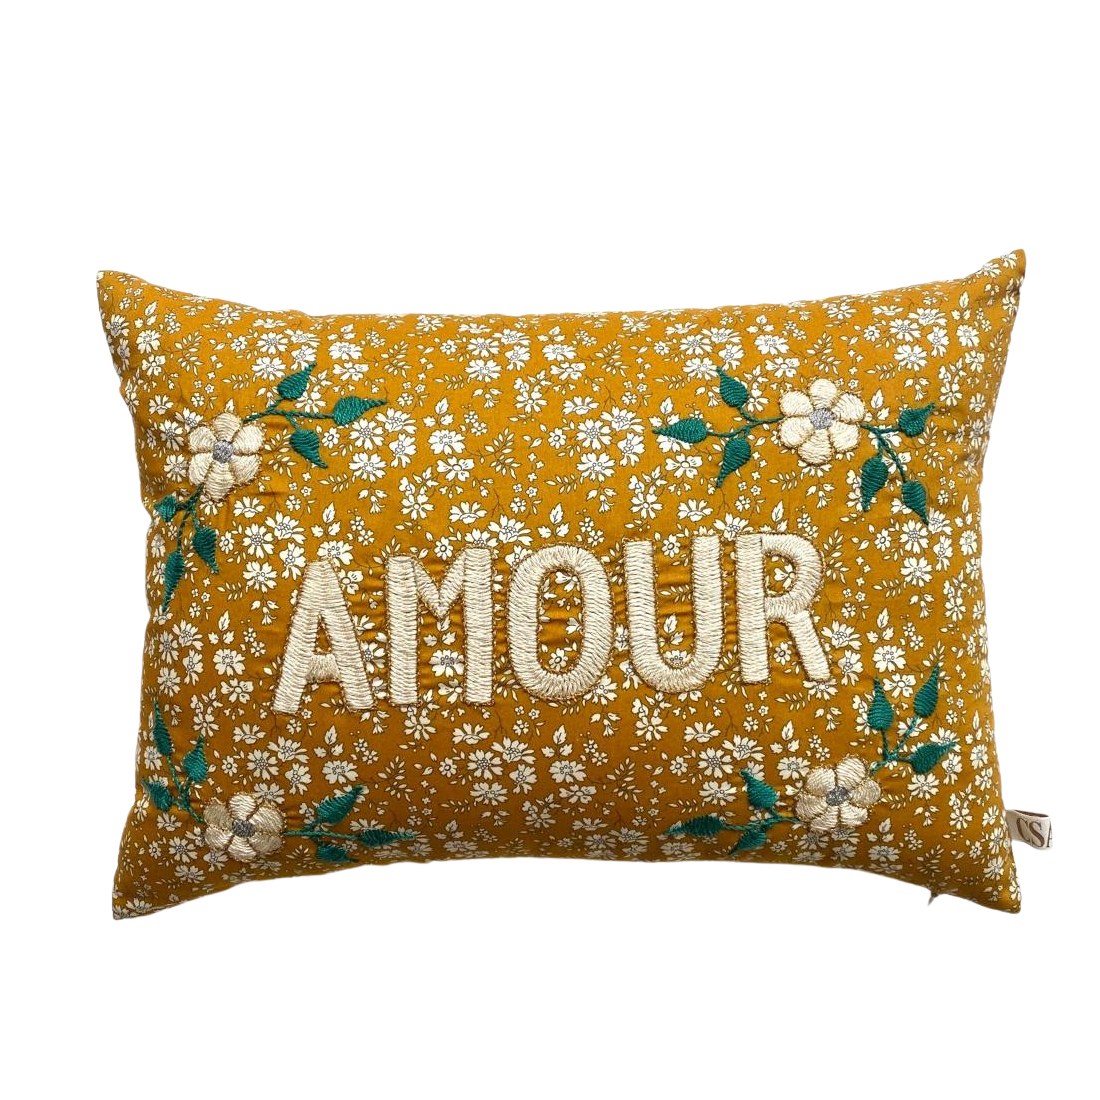 CSAO embroidered cushion amour in gold